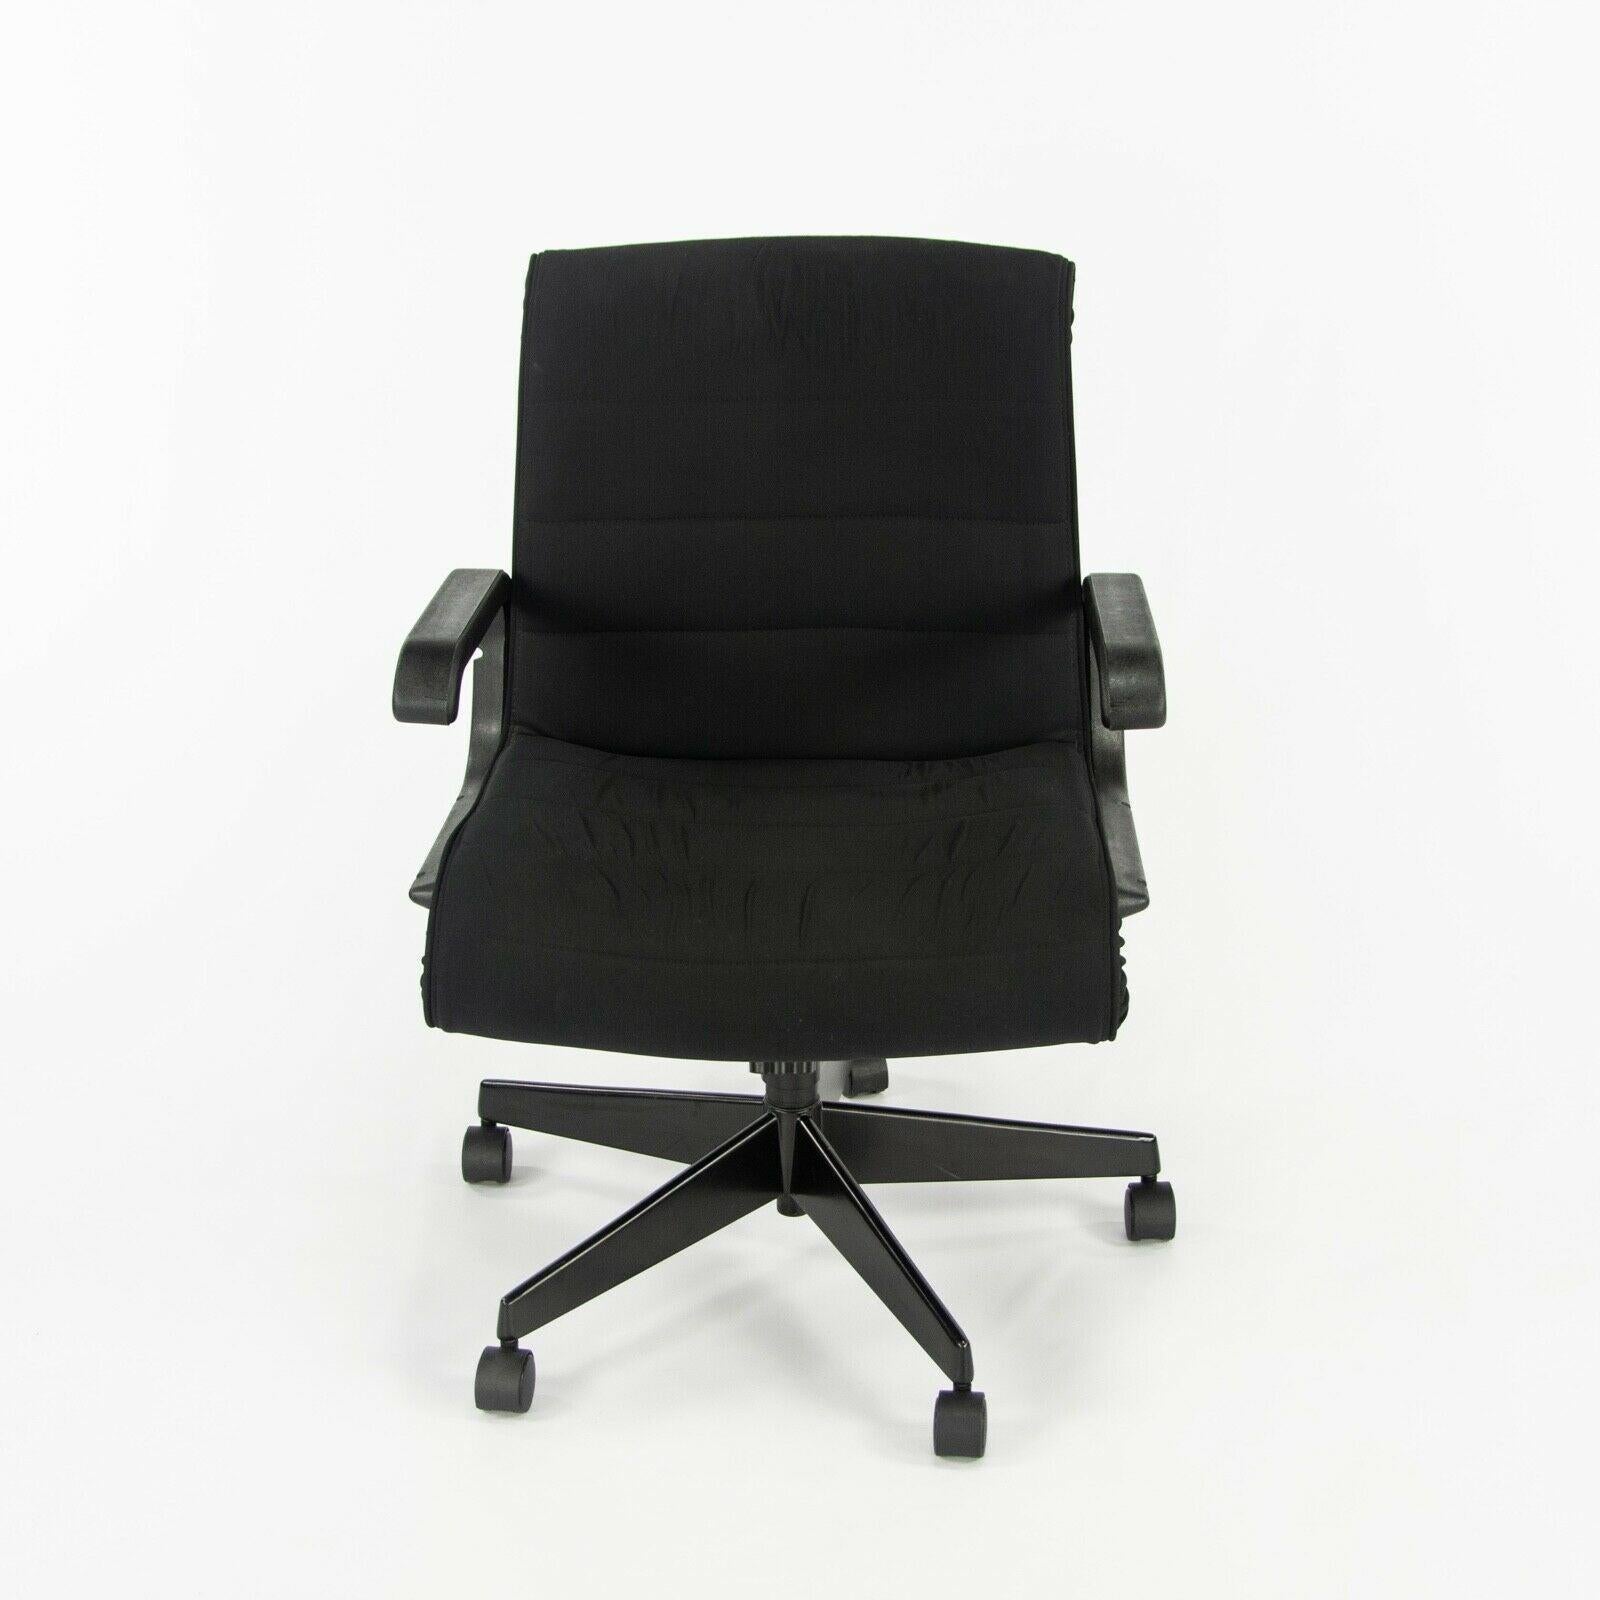 1990s Richard Sapper for Knoll Office / Desk Chair with Black Fabric and Frame For Sale 2